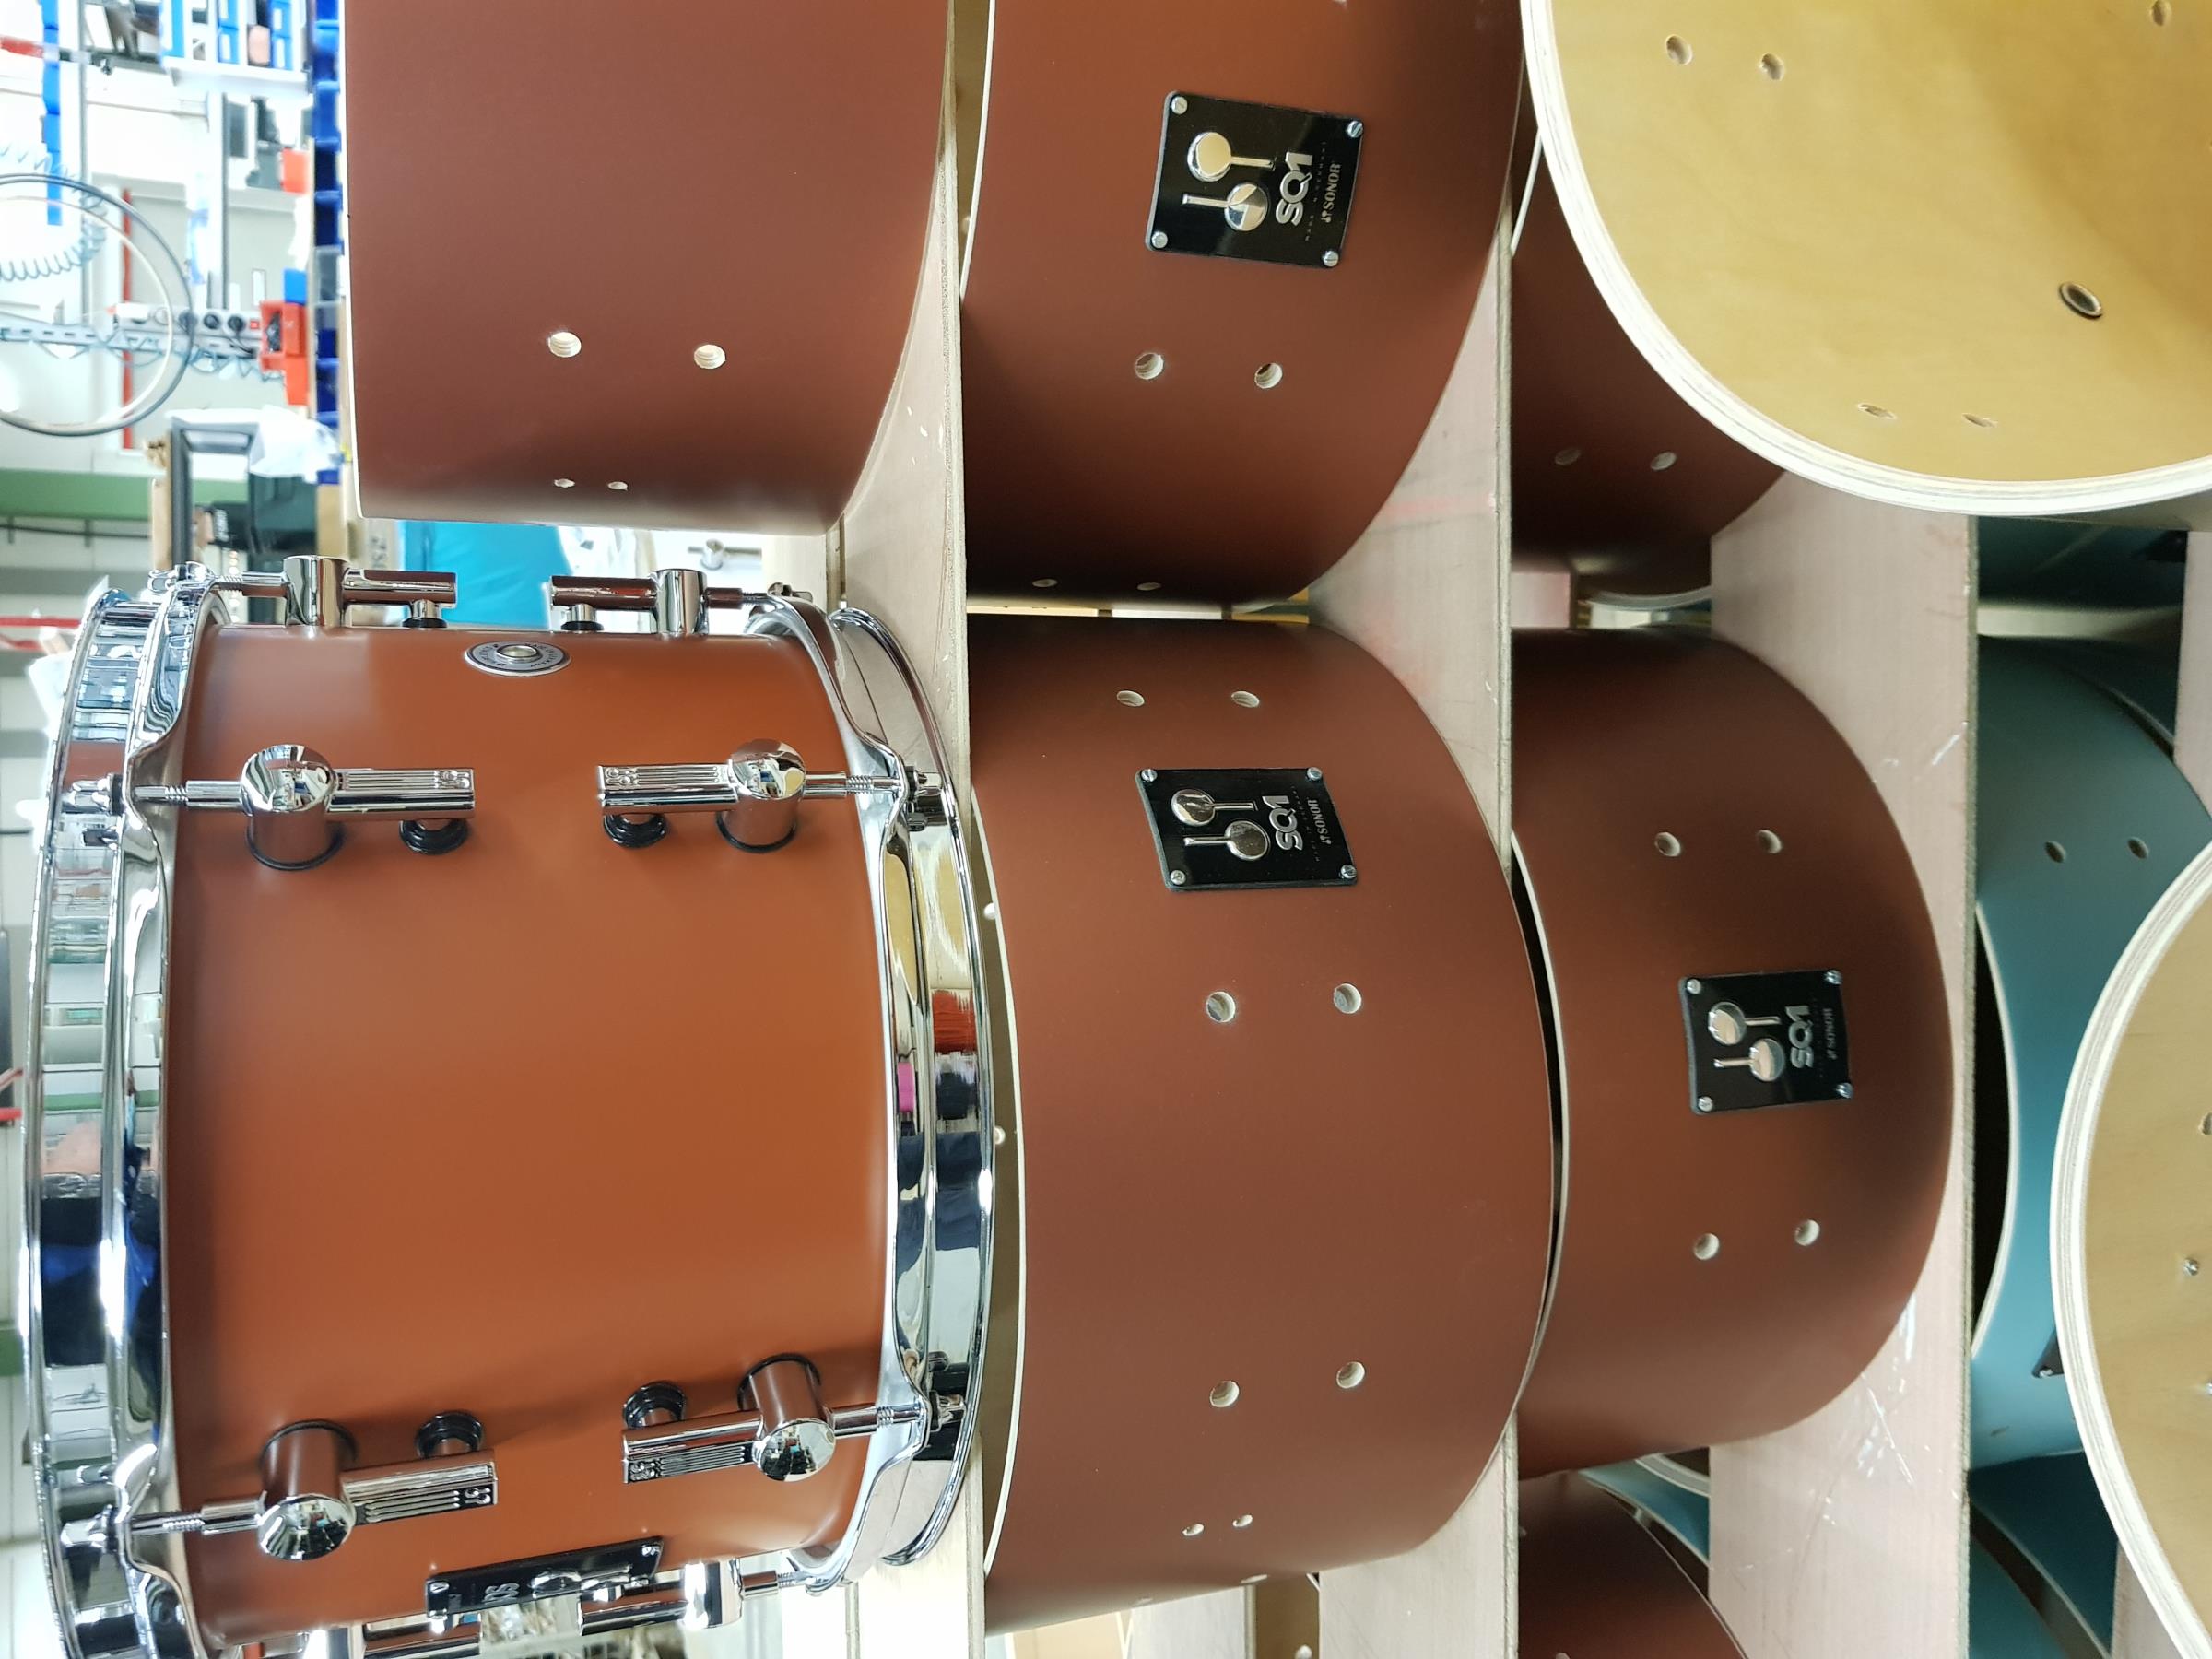 Sonor SQ1 Shell Set 22BD/12T/16FT Satin Copper (Prototyp)